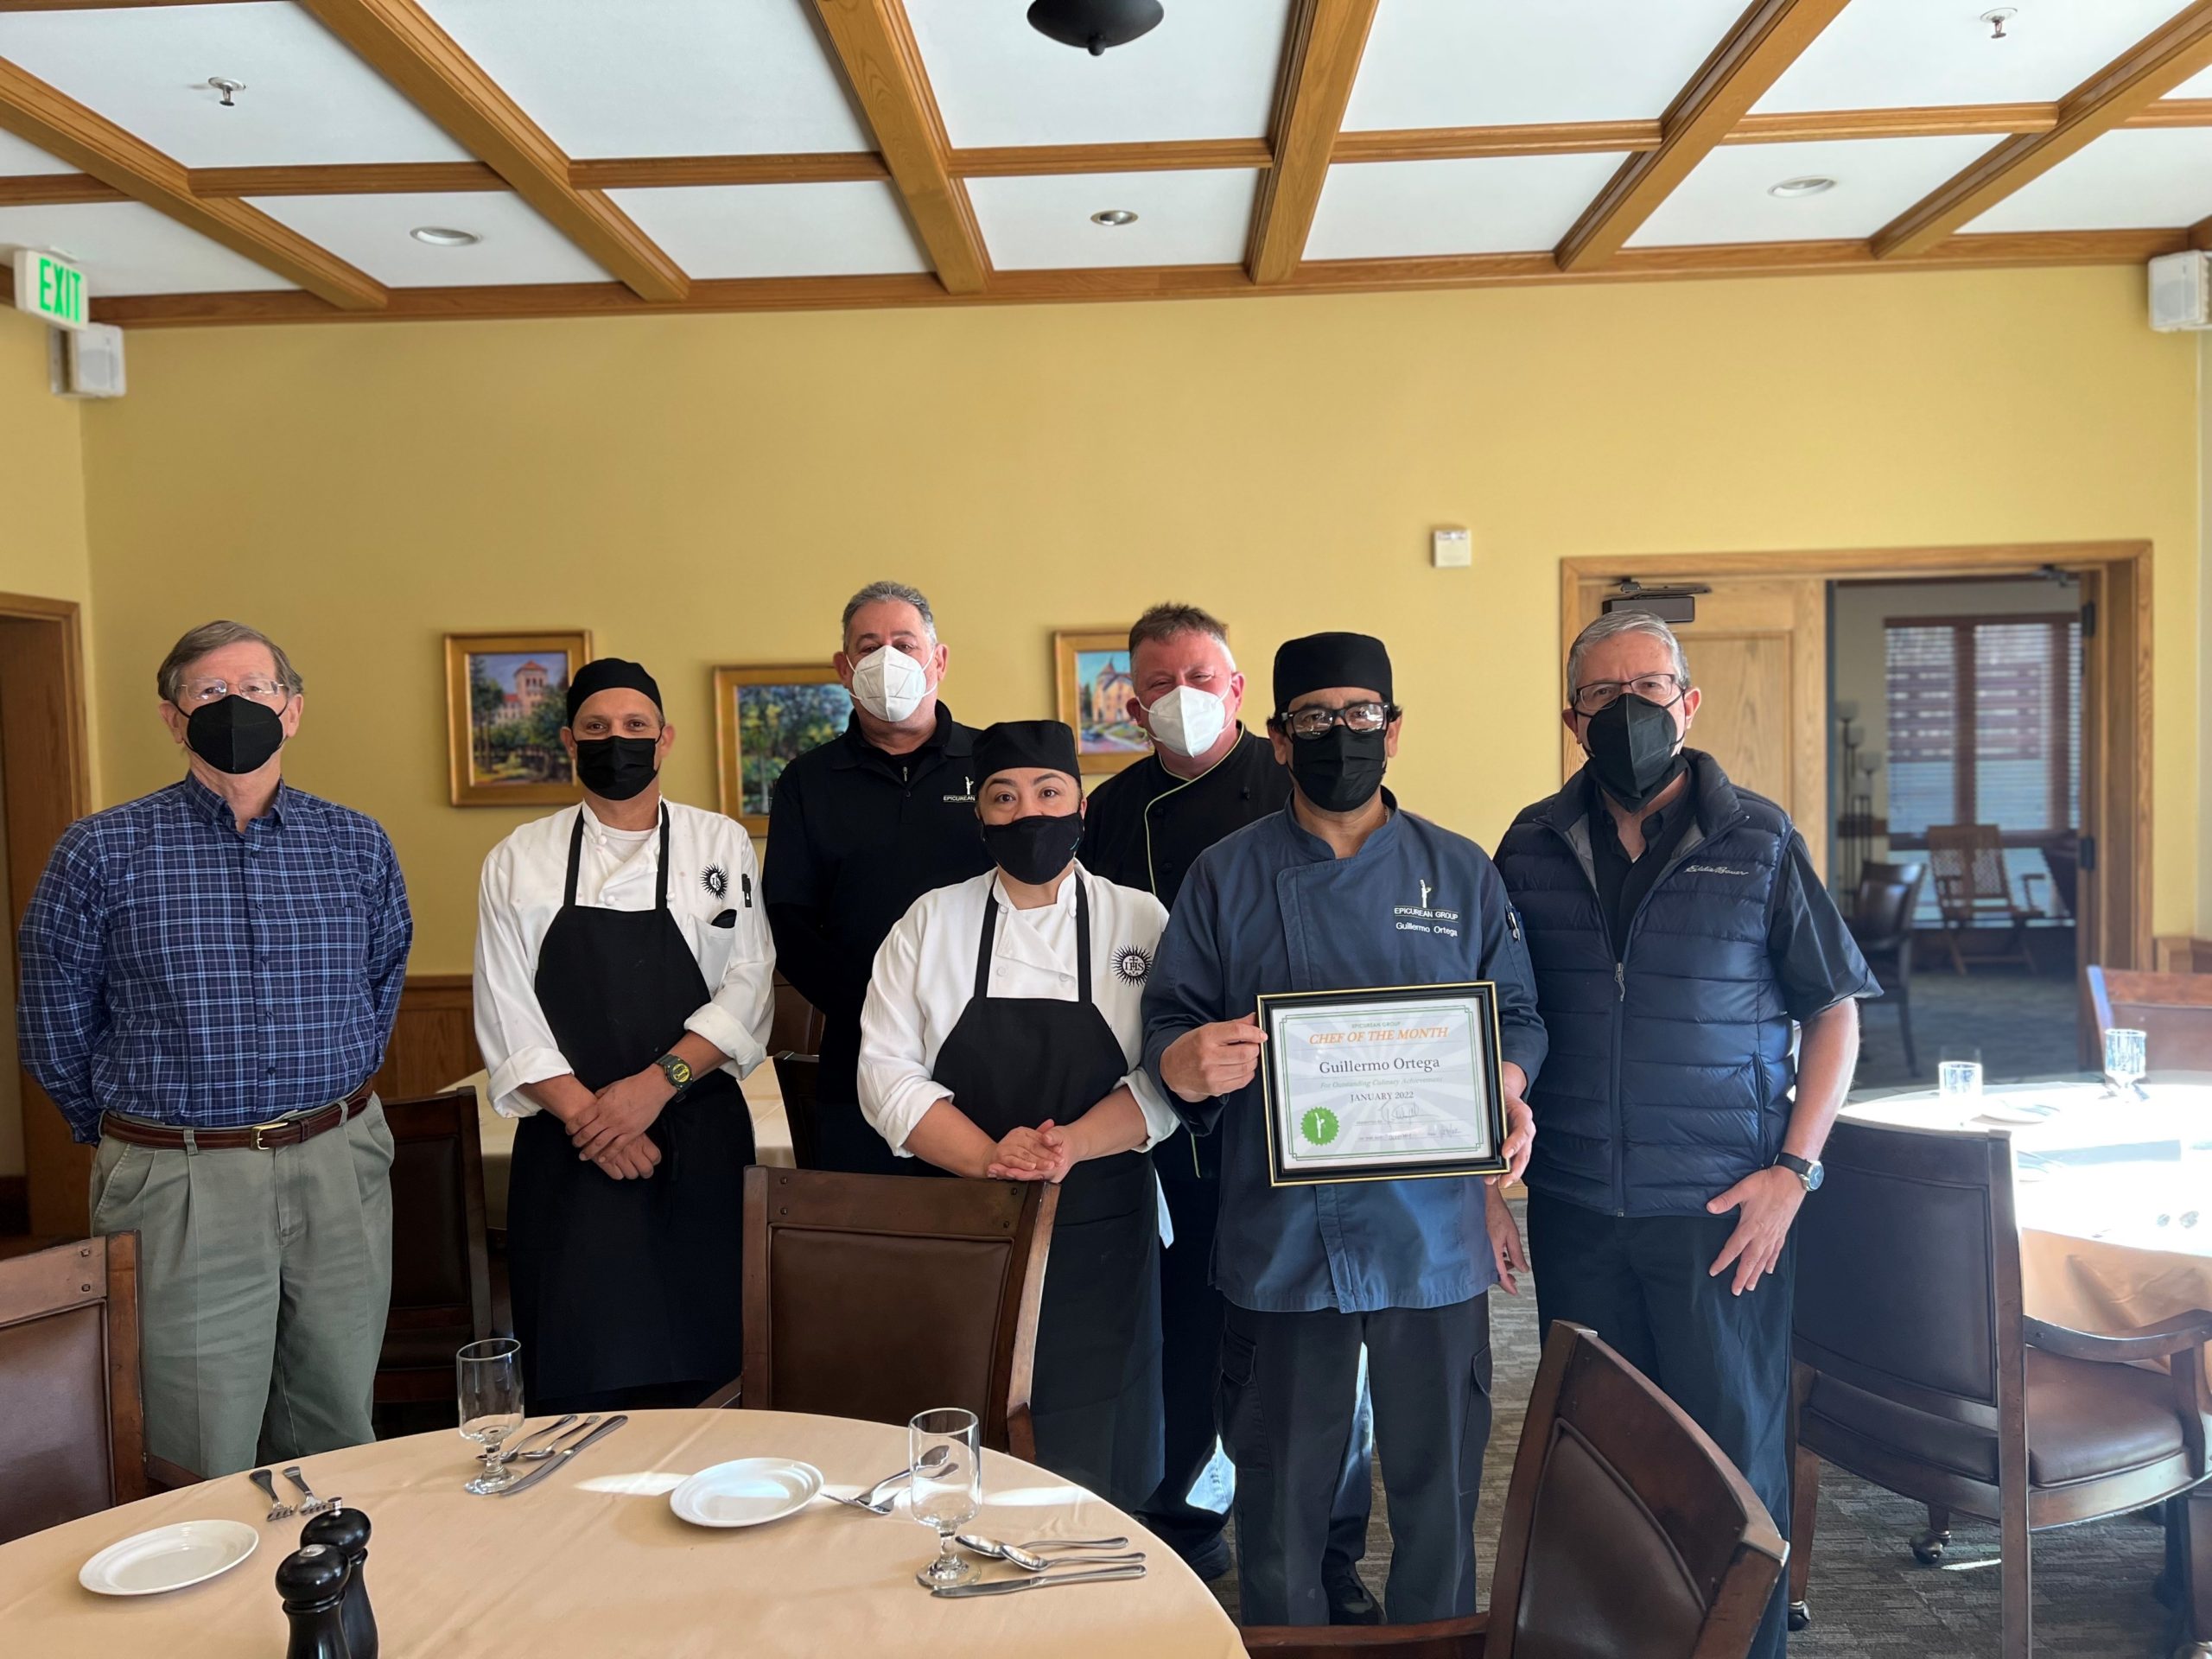 Guillermo Ortega awarded as January 2022 Chef of the Month